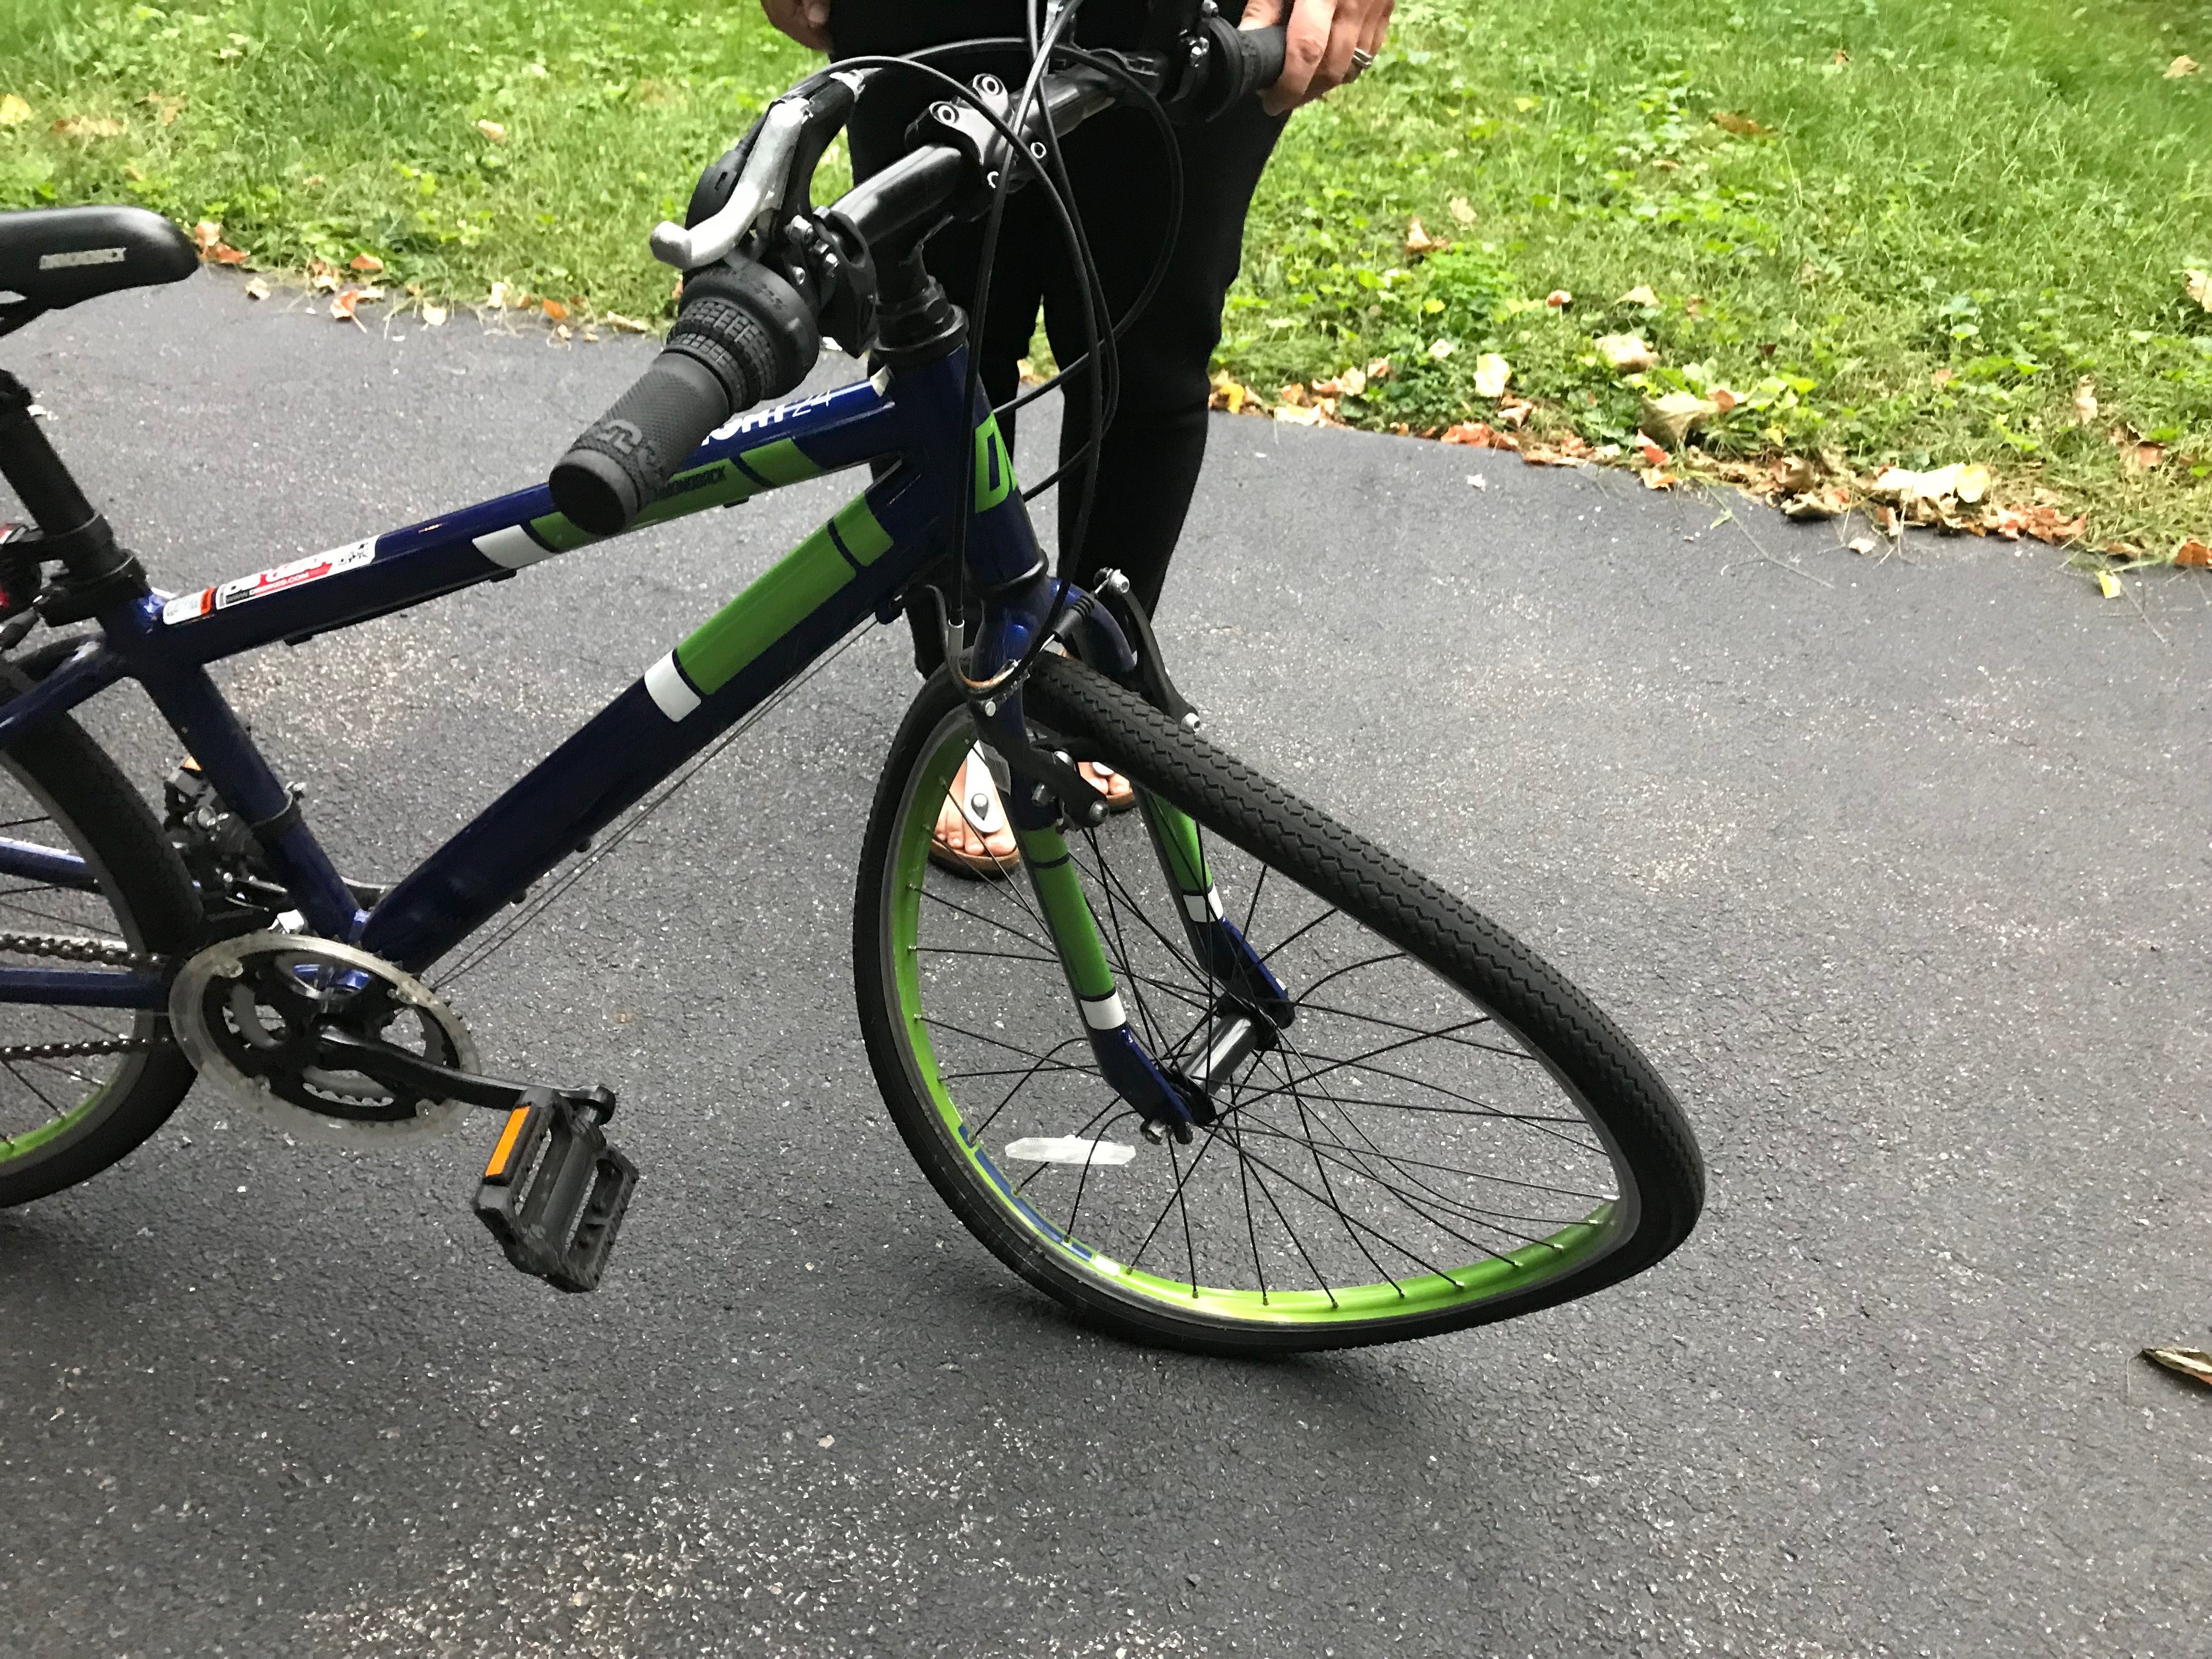 gear bikes for 10 year olds